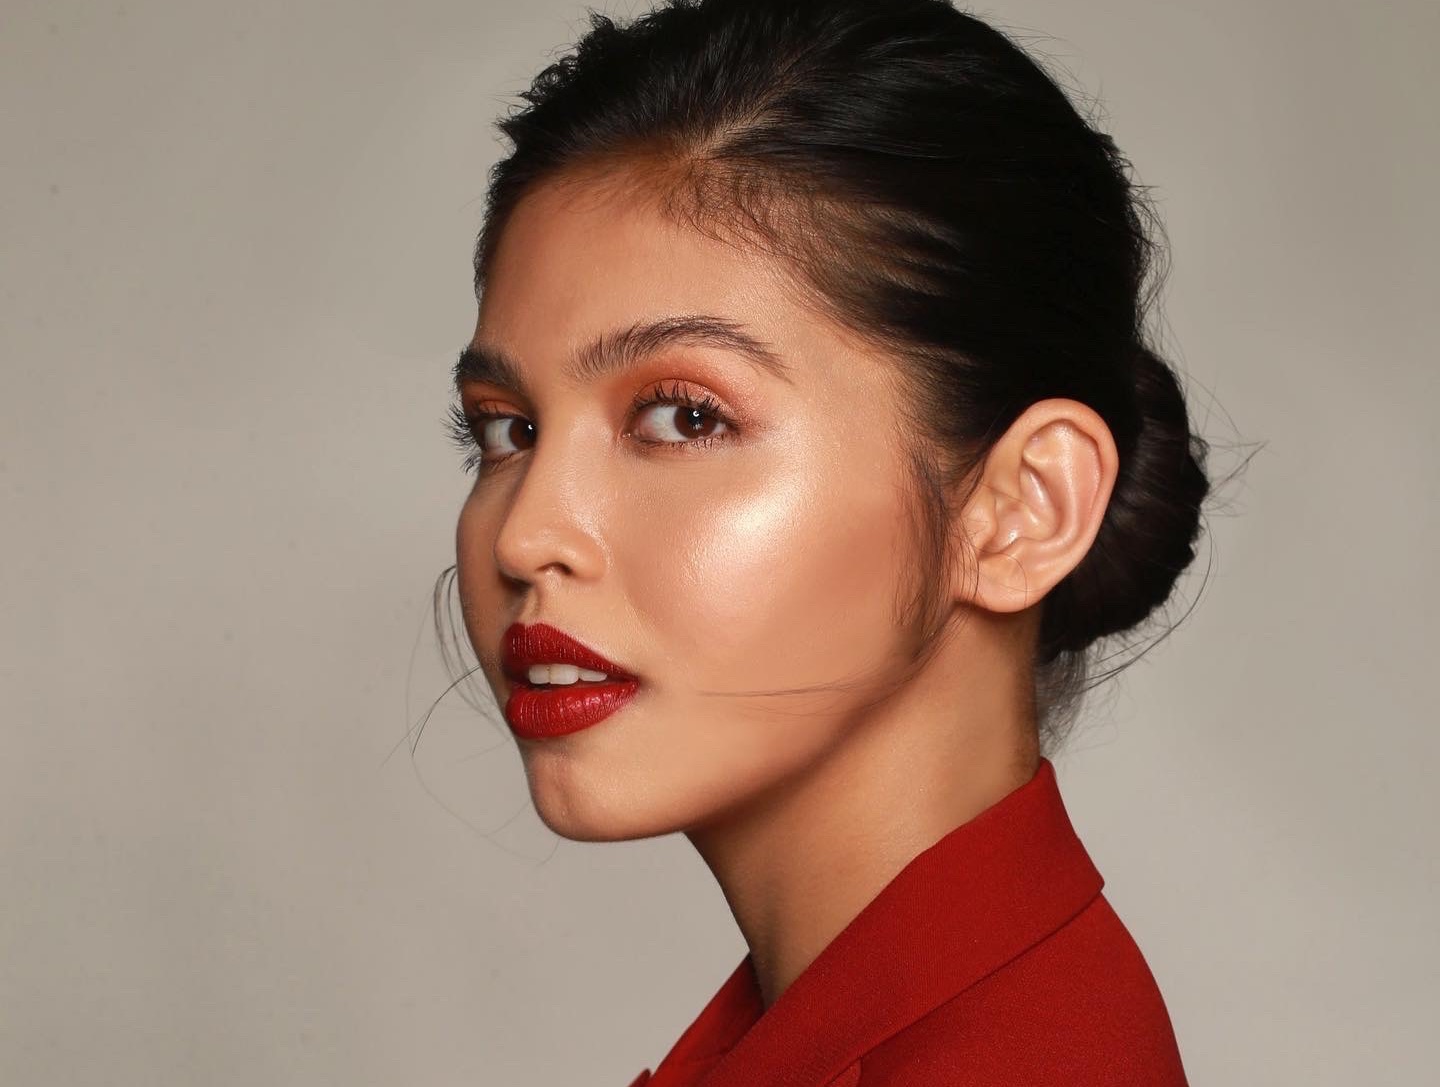 Maine Mendoza Becomes Victim of Fake Video Scandal; Agency to Sue People Sh...